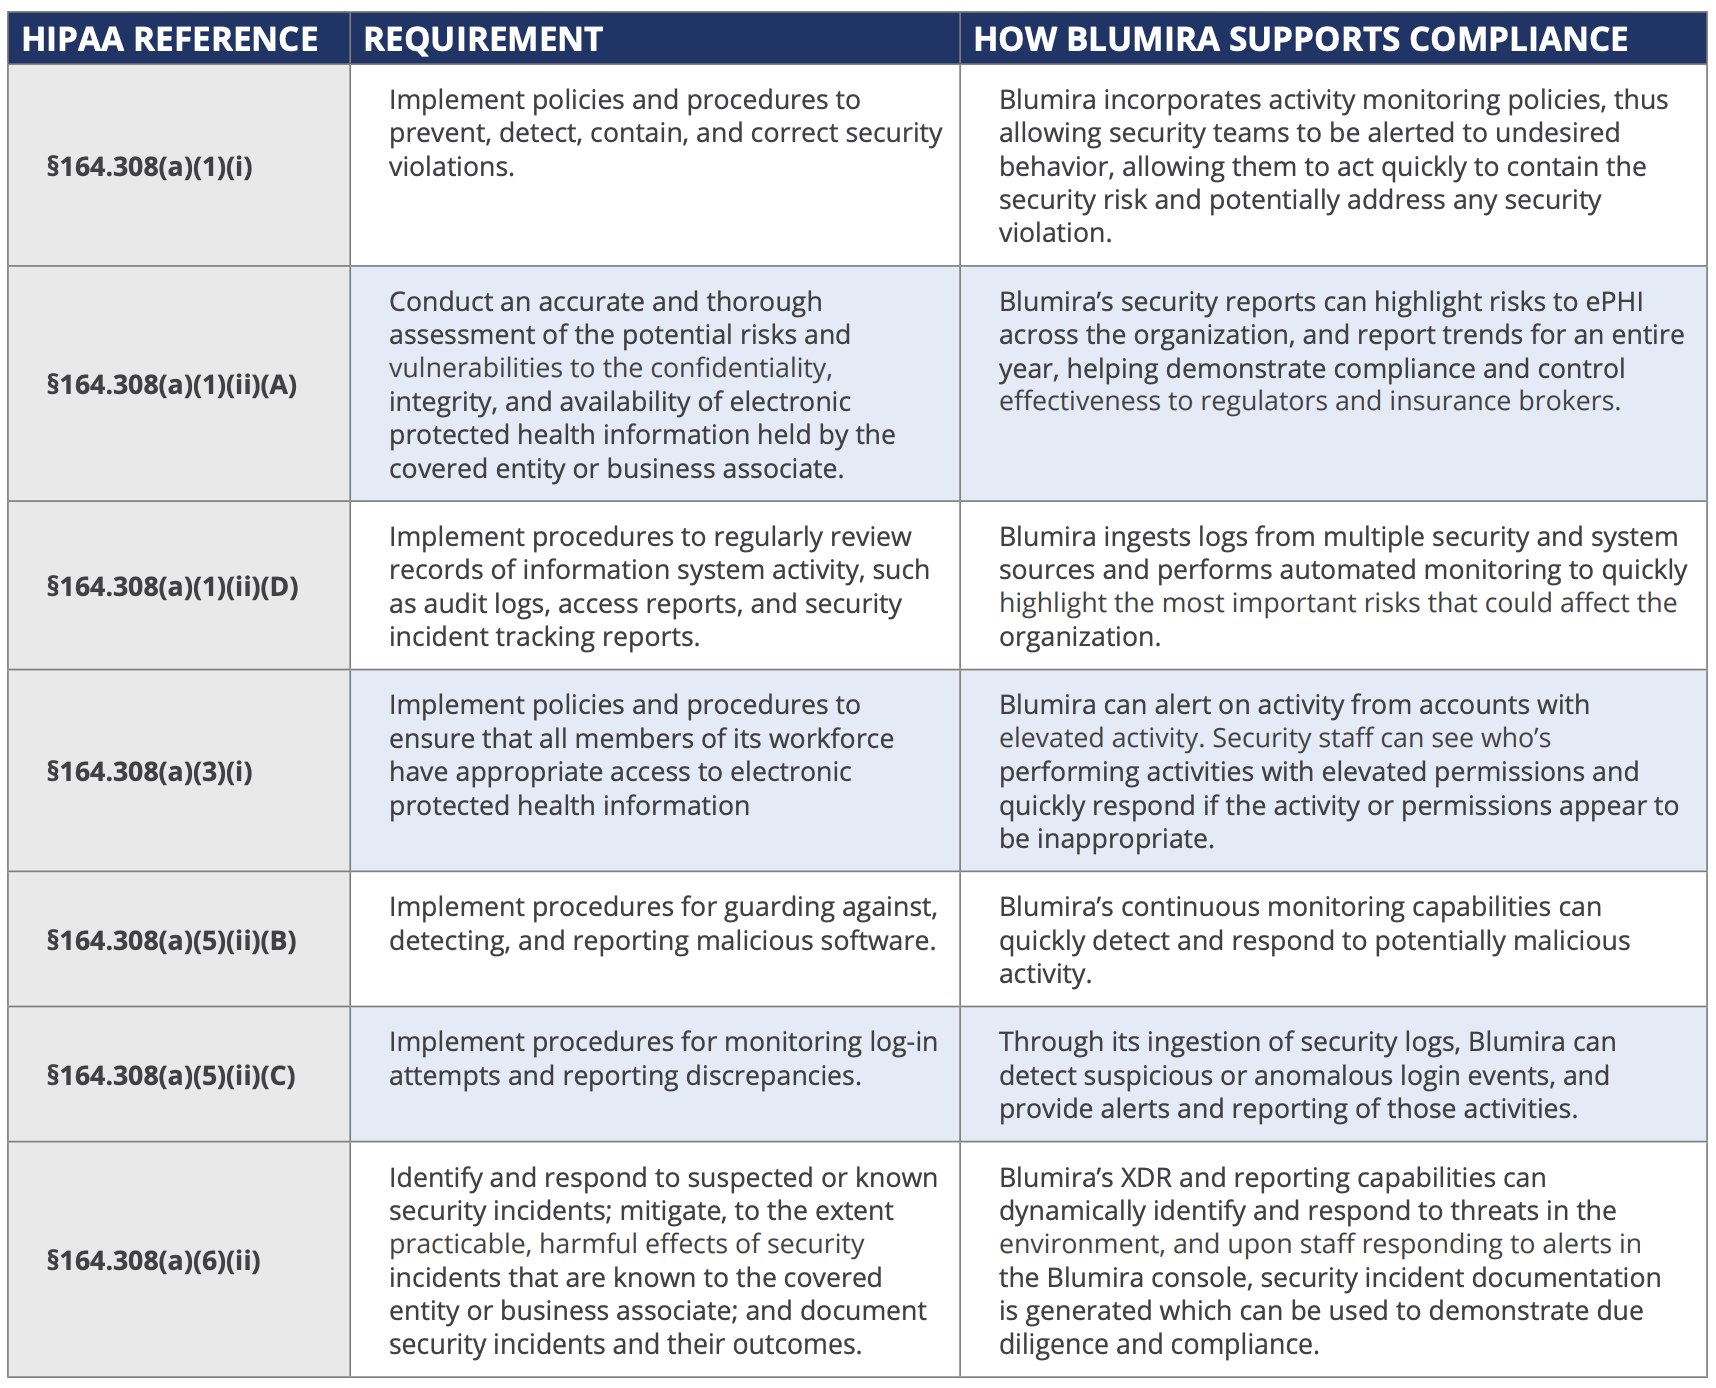 This is a table describing how Blumira supports specific HIPAA controls for healthcare organizations